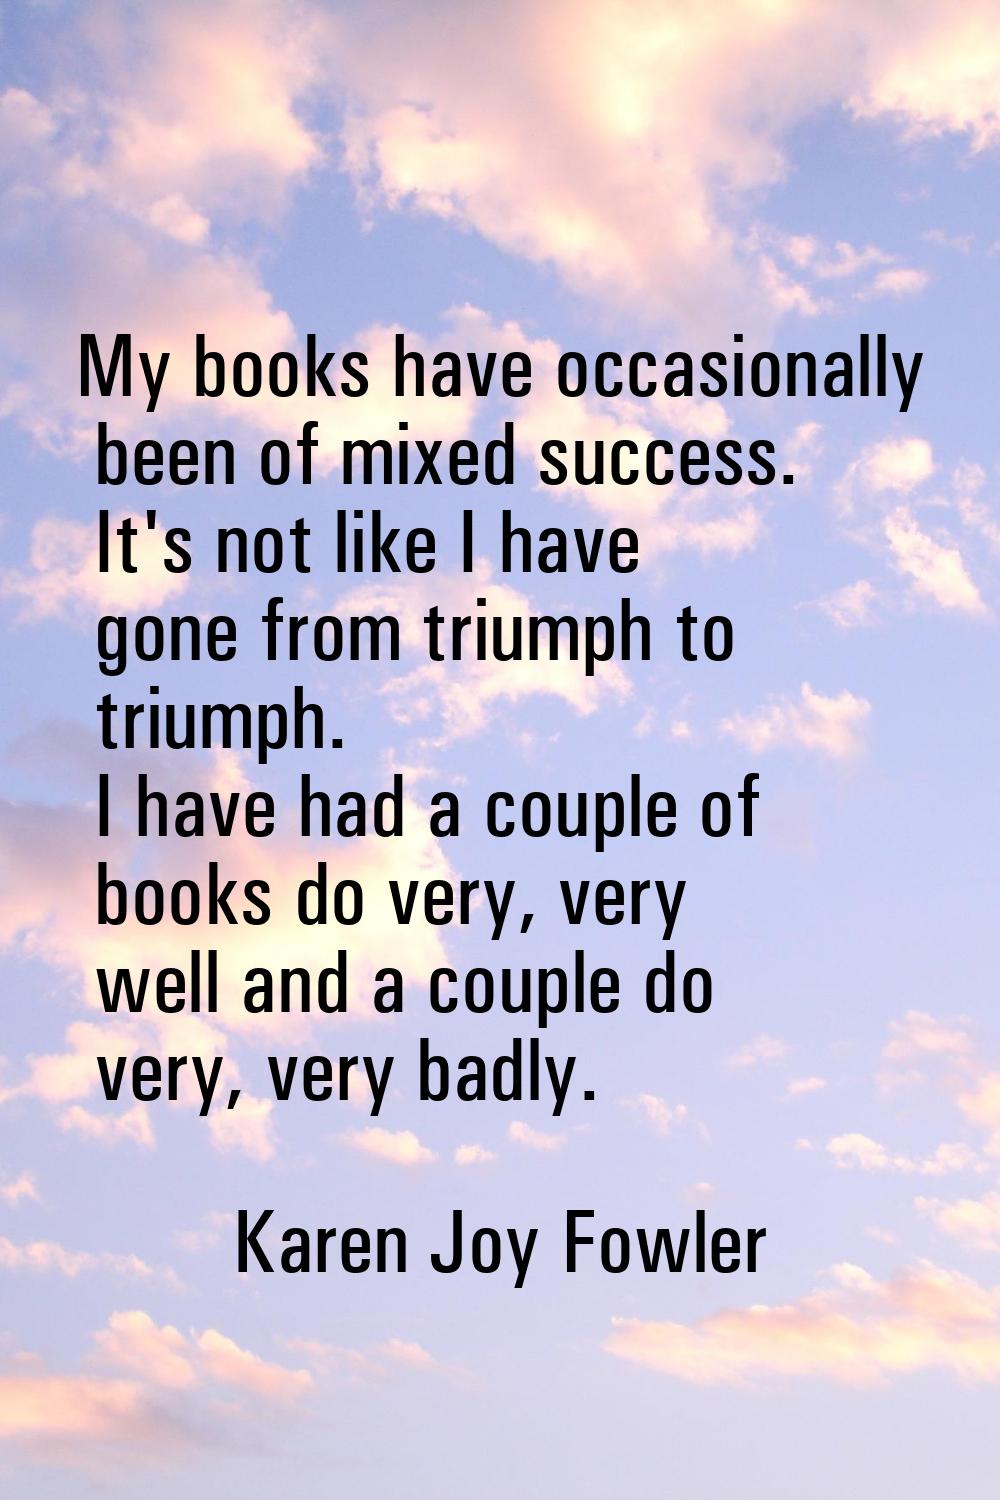 My books have occasionally been of mixed success. It's not like I have gone from triumph to triumph